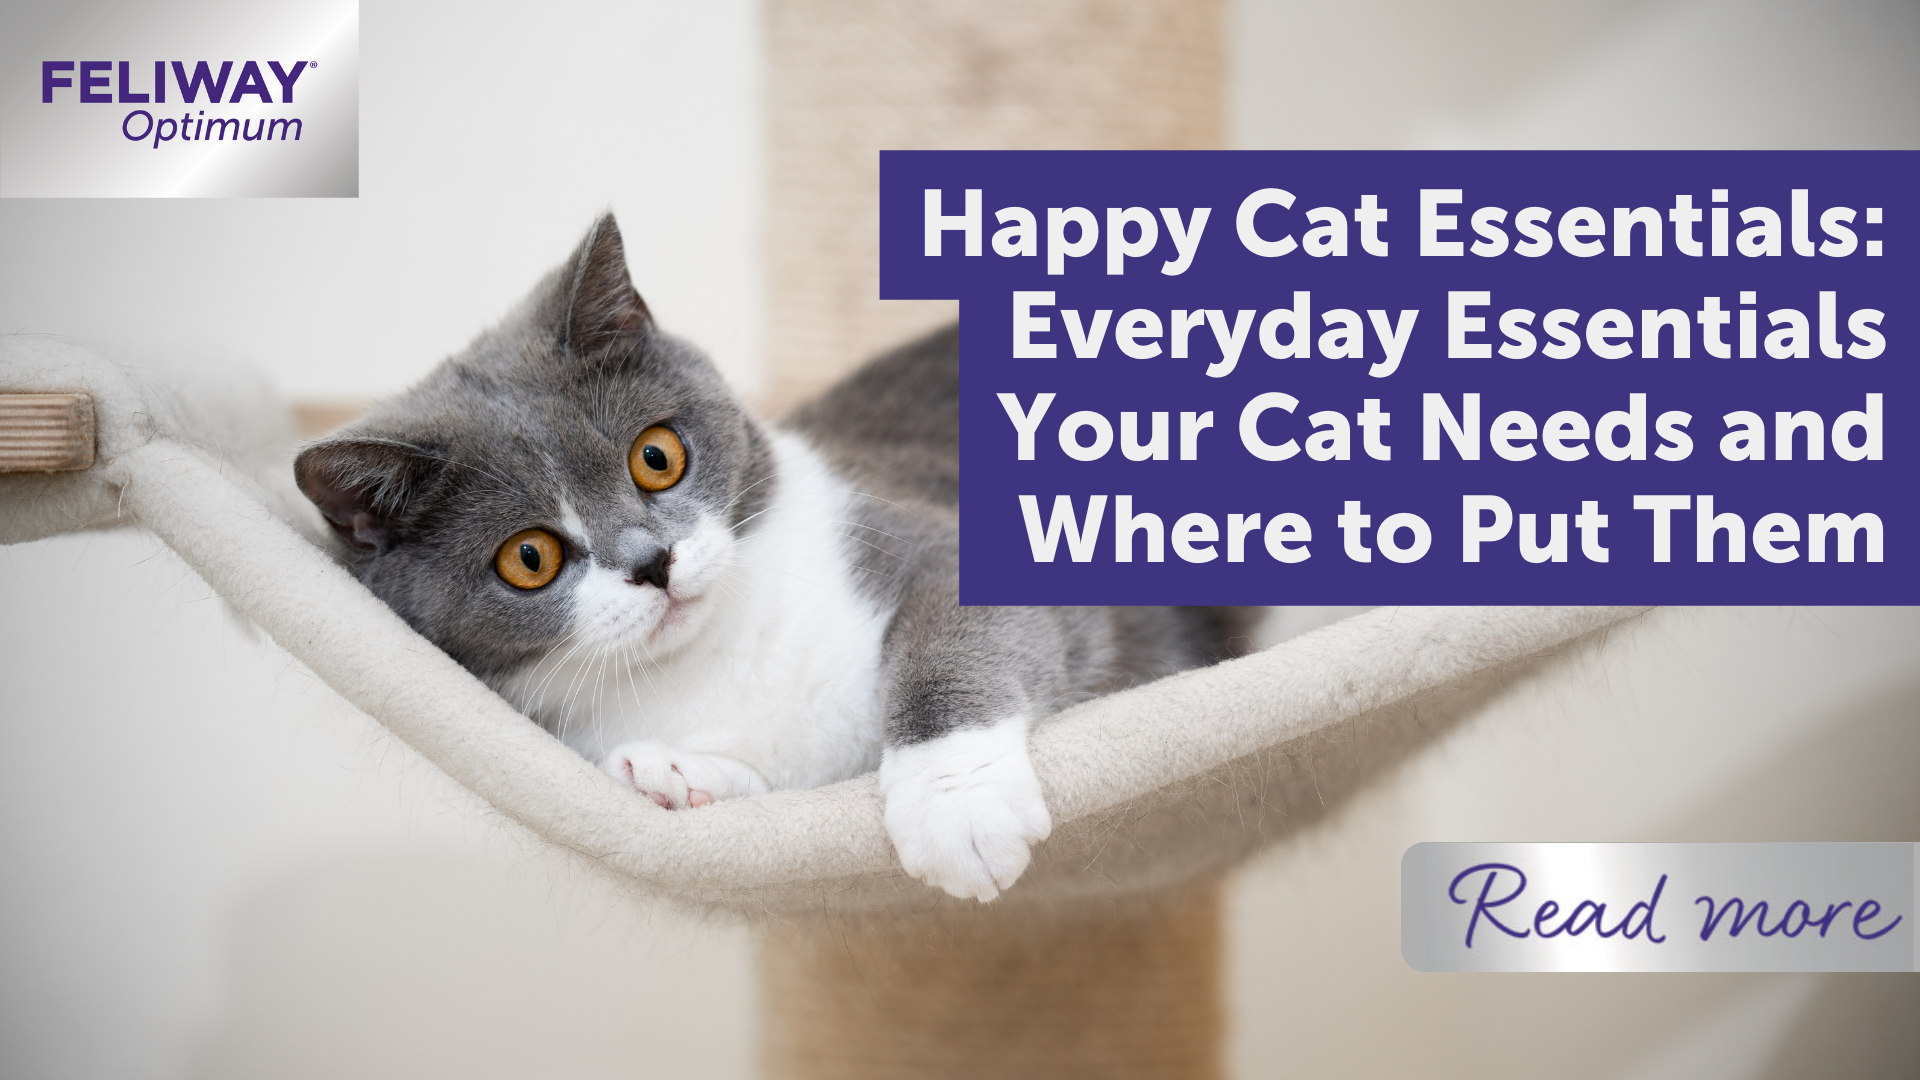 Happy cat essentials: everyday essentials your cat needs and where to put¬†them